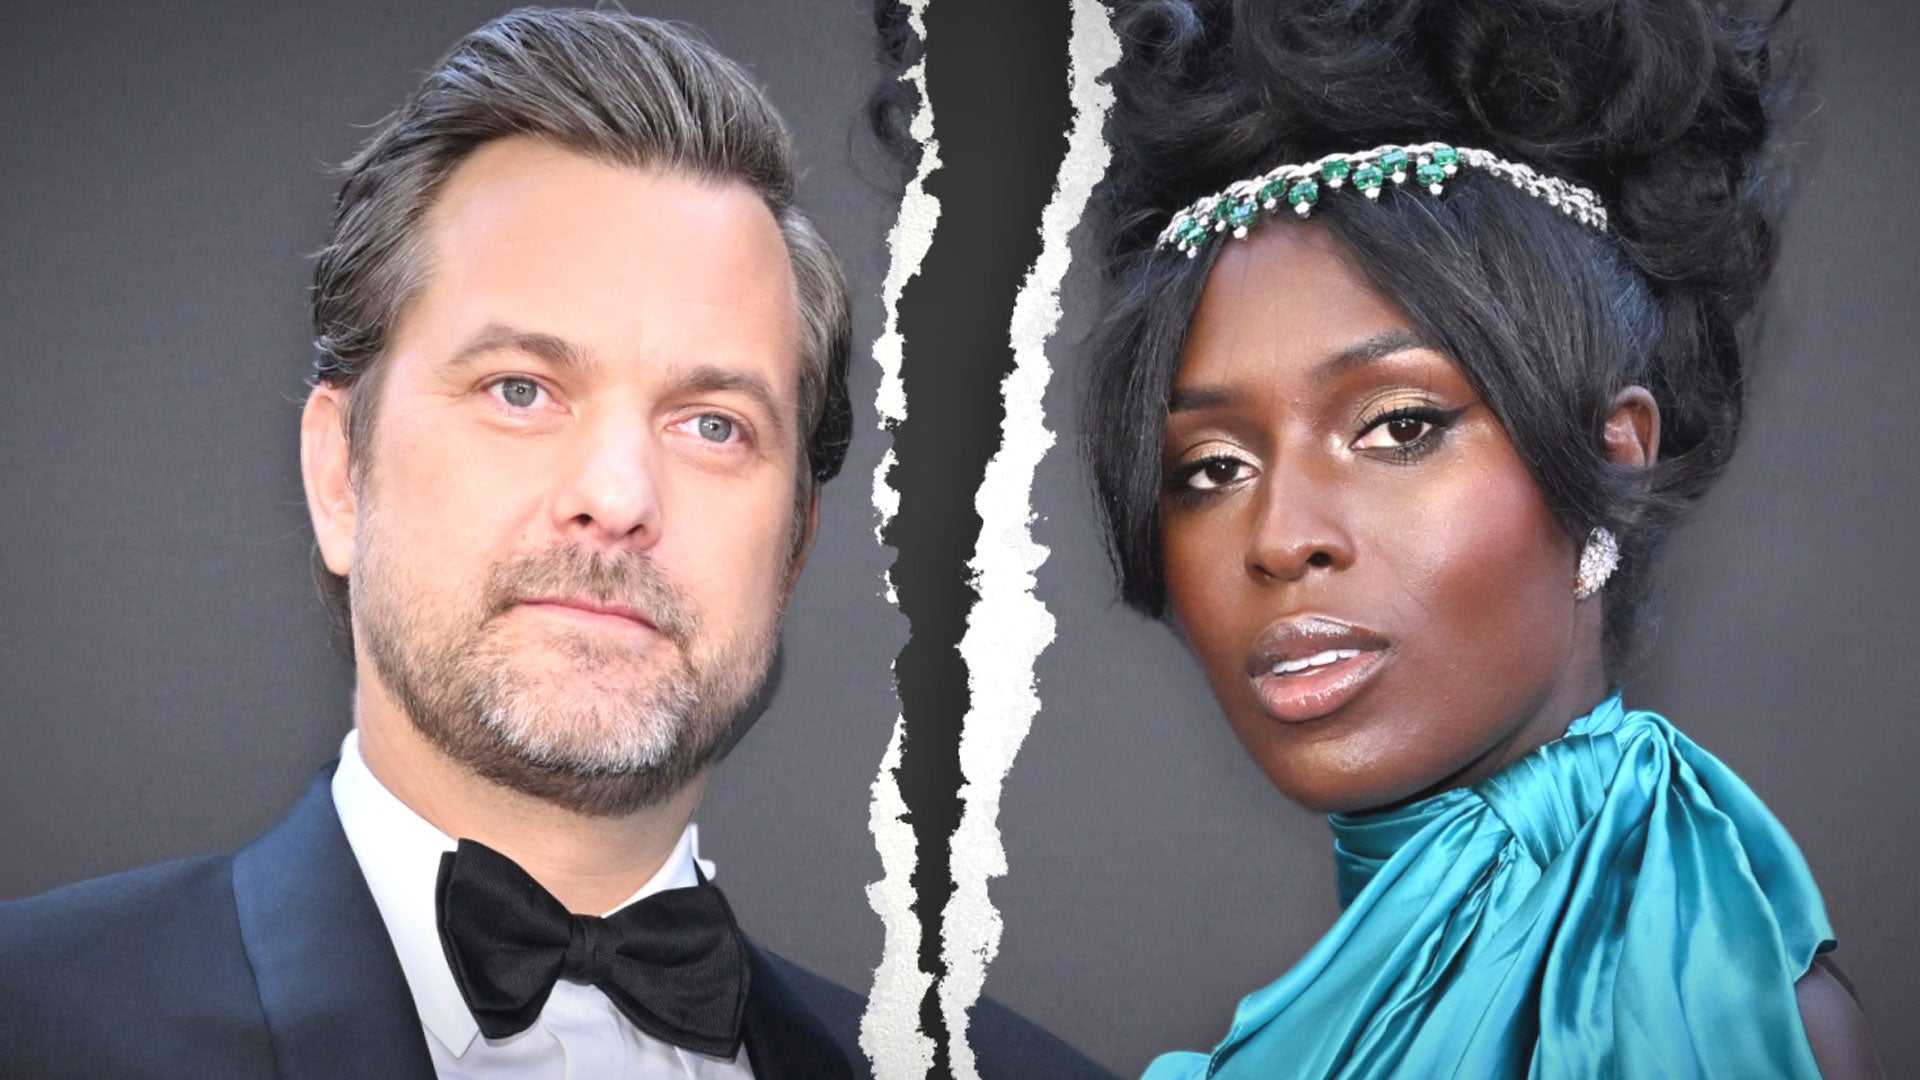 Lupita Nyong'o and Boyfriend Split After She Was Seen With Joshua Jackson